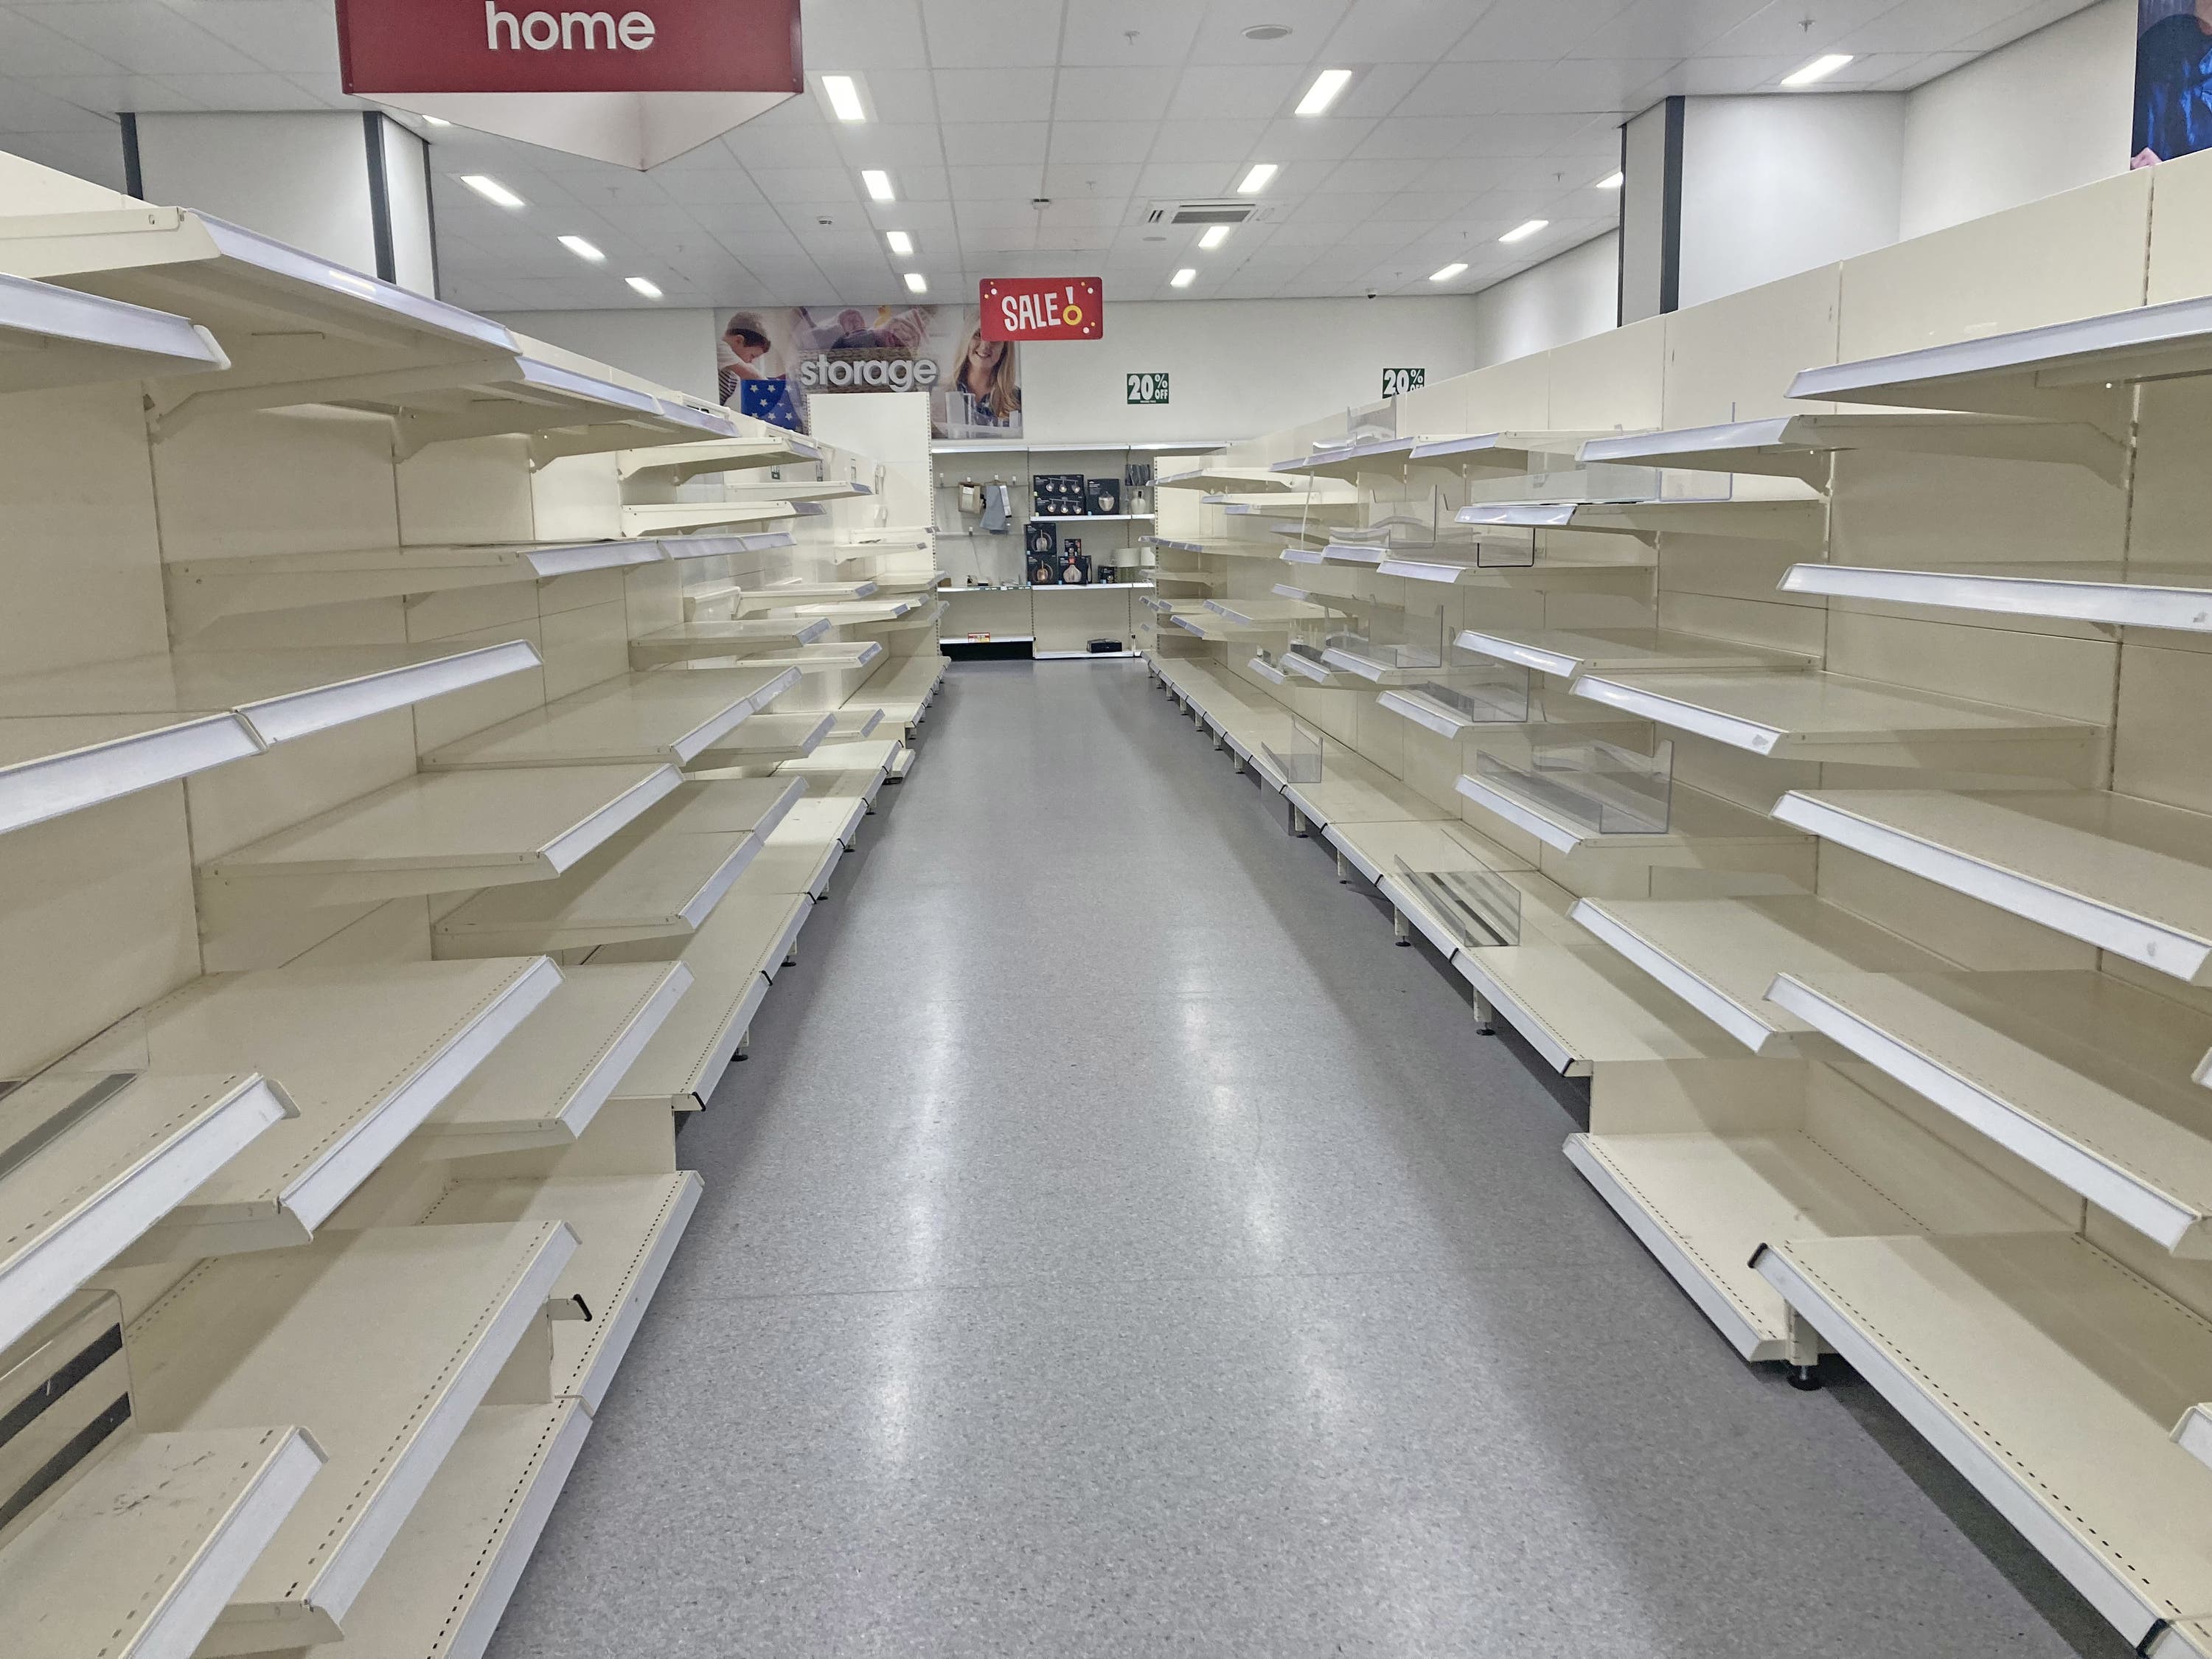 Shelves have been emptying at Wilko shops since the company entered administration.